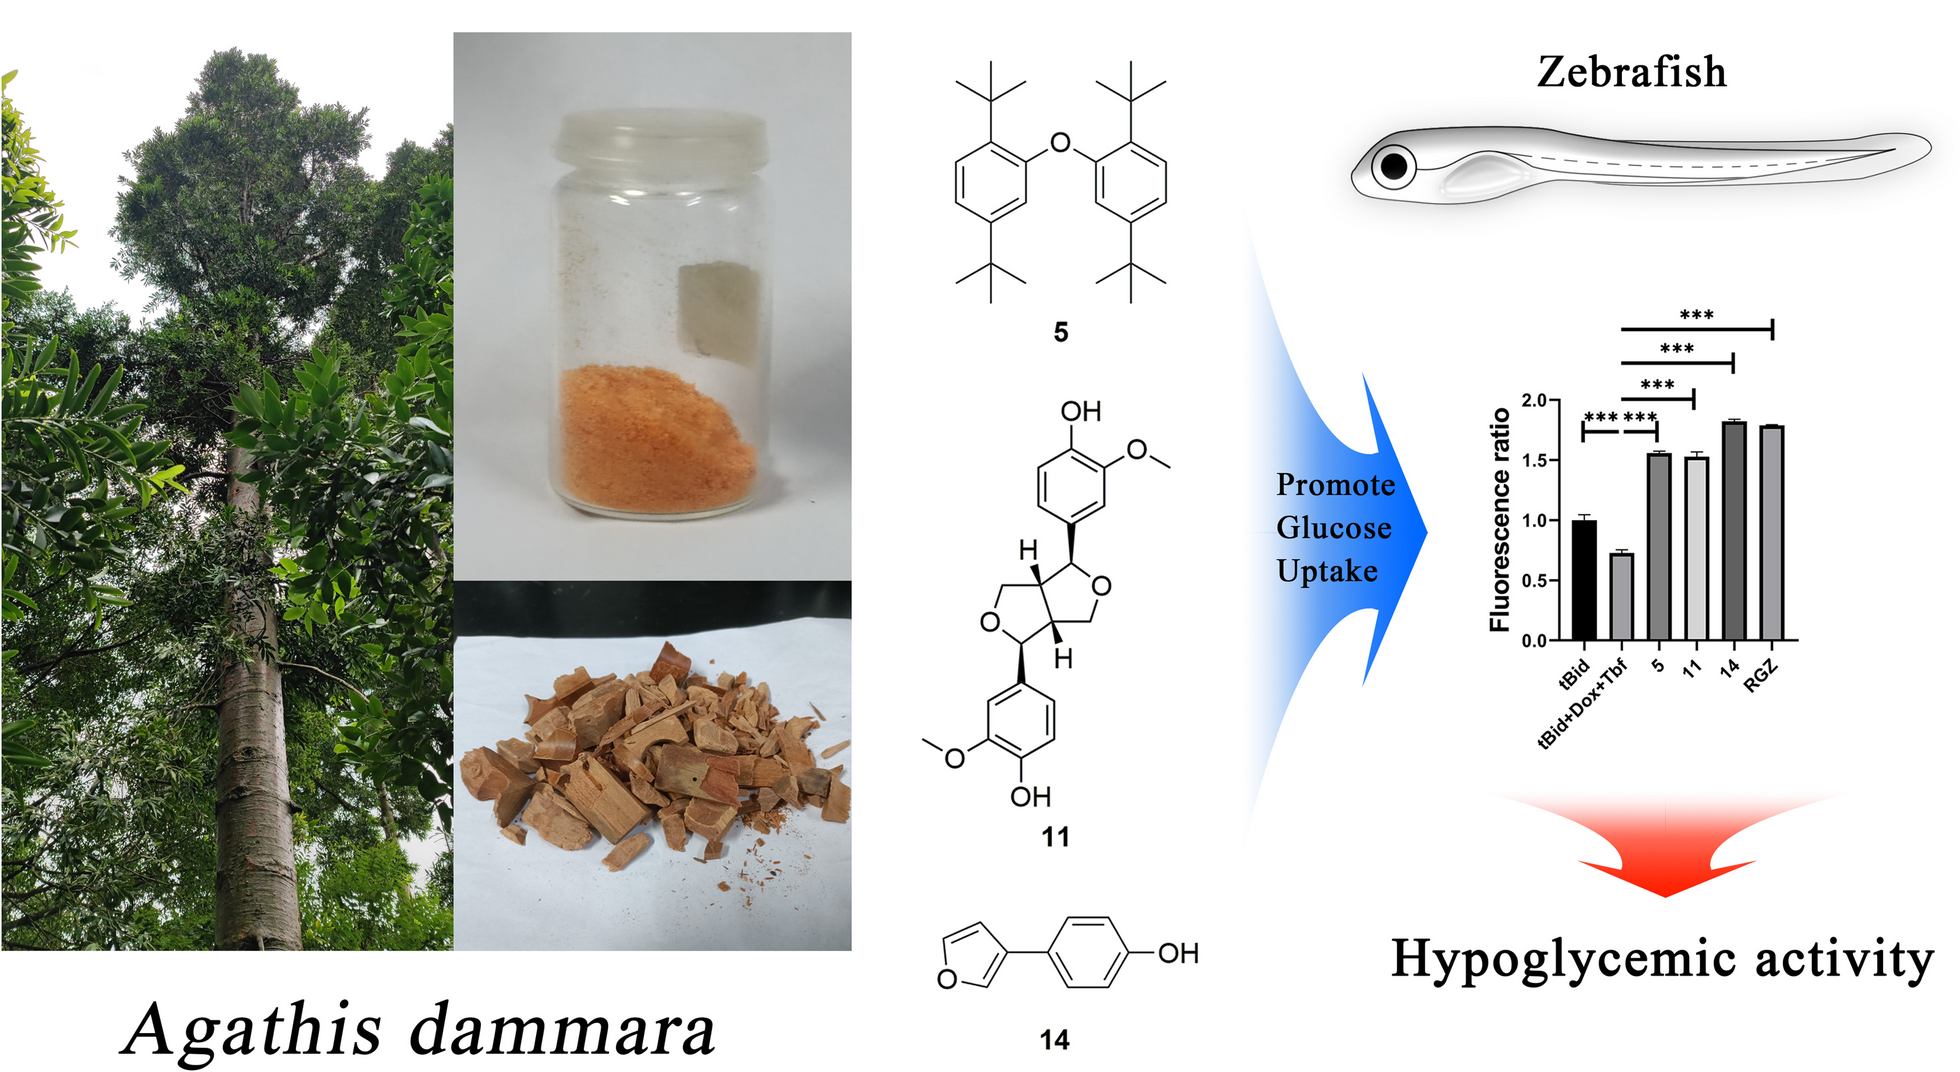 Compounds from Agathis dammara exert hypoglycaemic activity by enhancing glucose uptake: lignans, terpenes and others